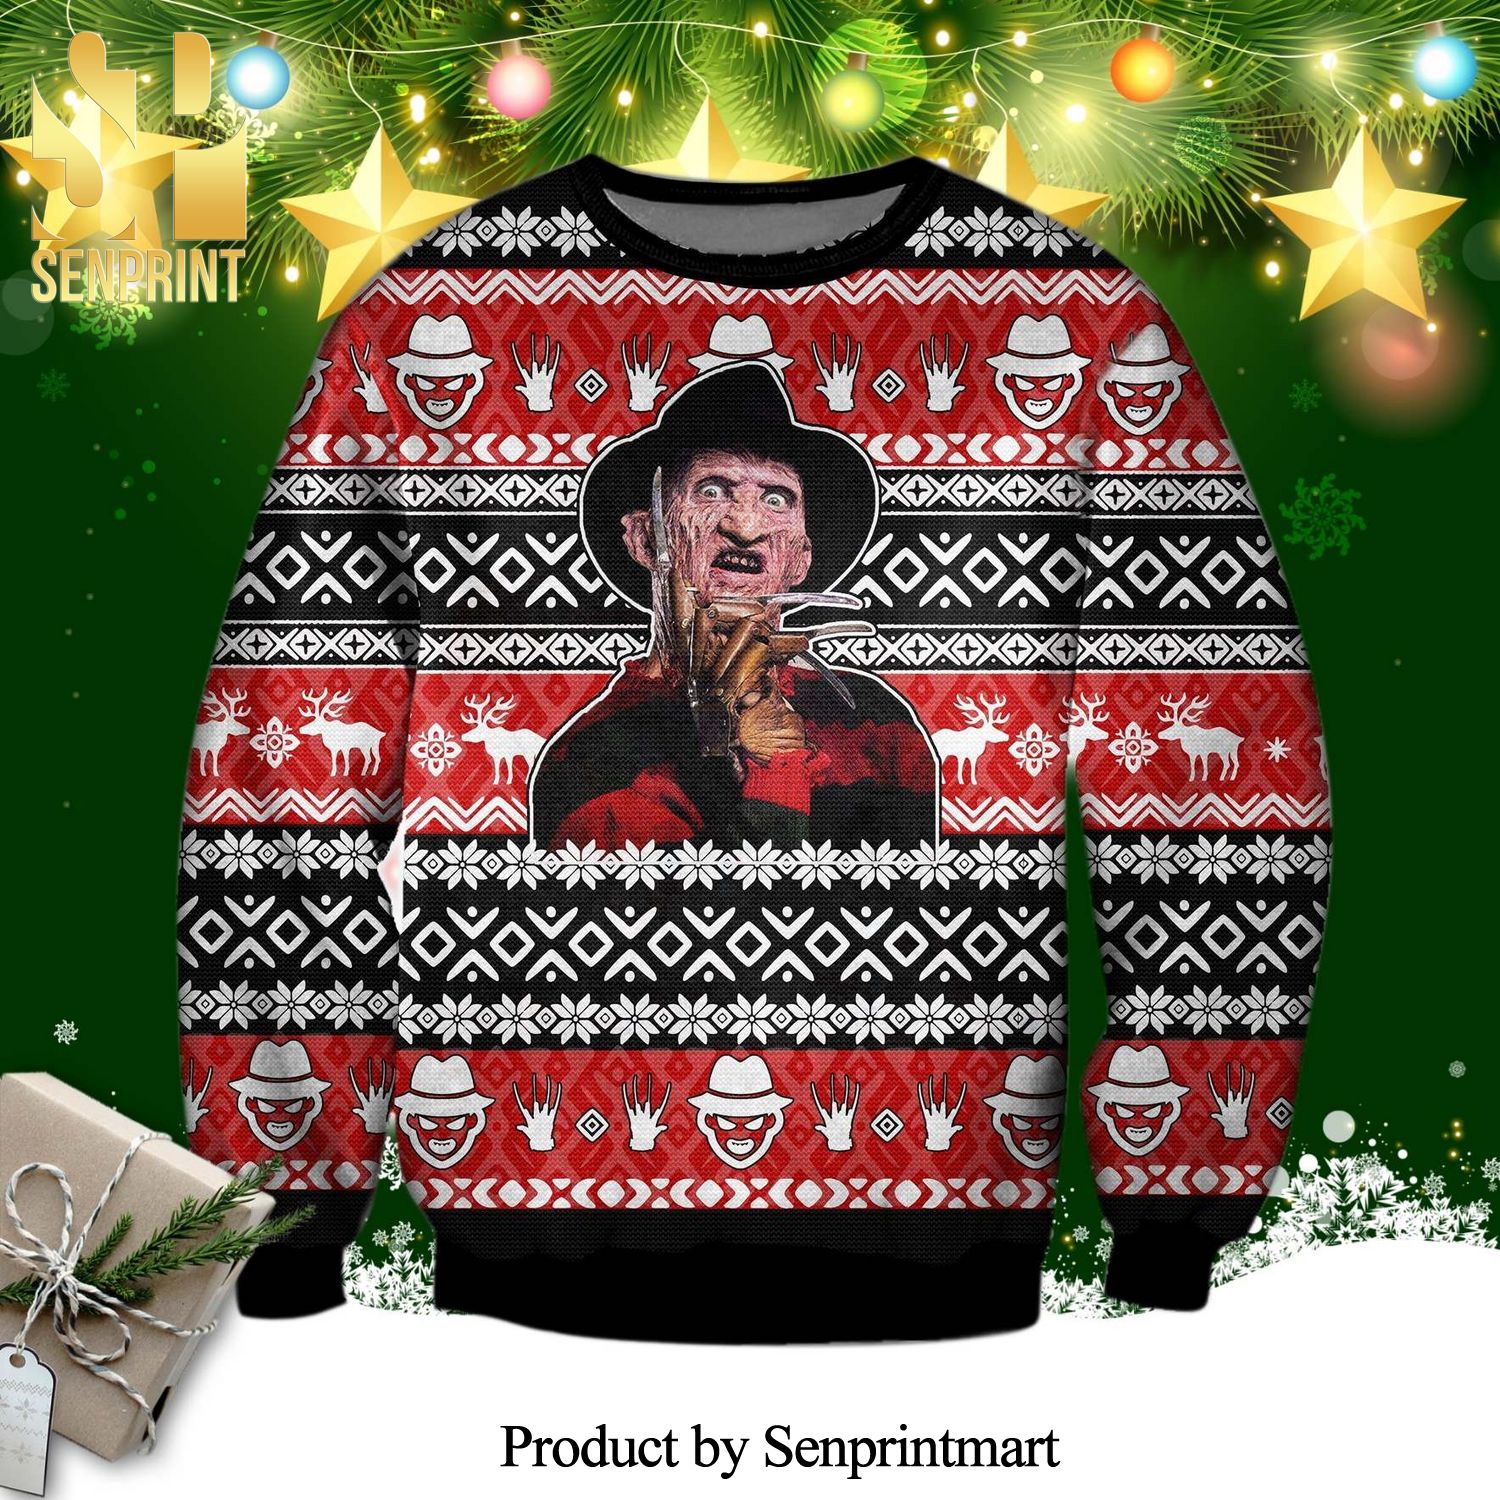 Freddy Krueger A Nightmare On Elm Street Horror Poster Face Knitted Ugly Christmas Sweater